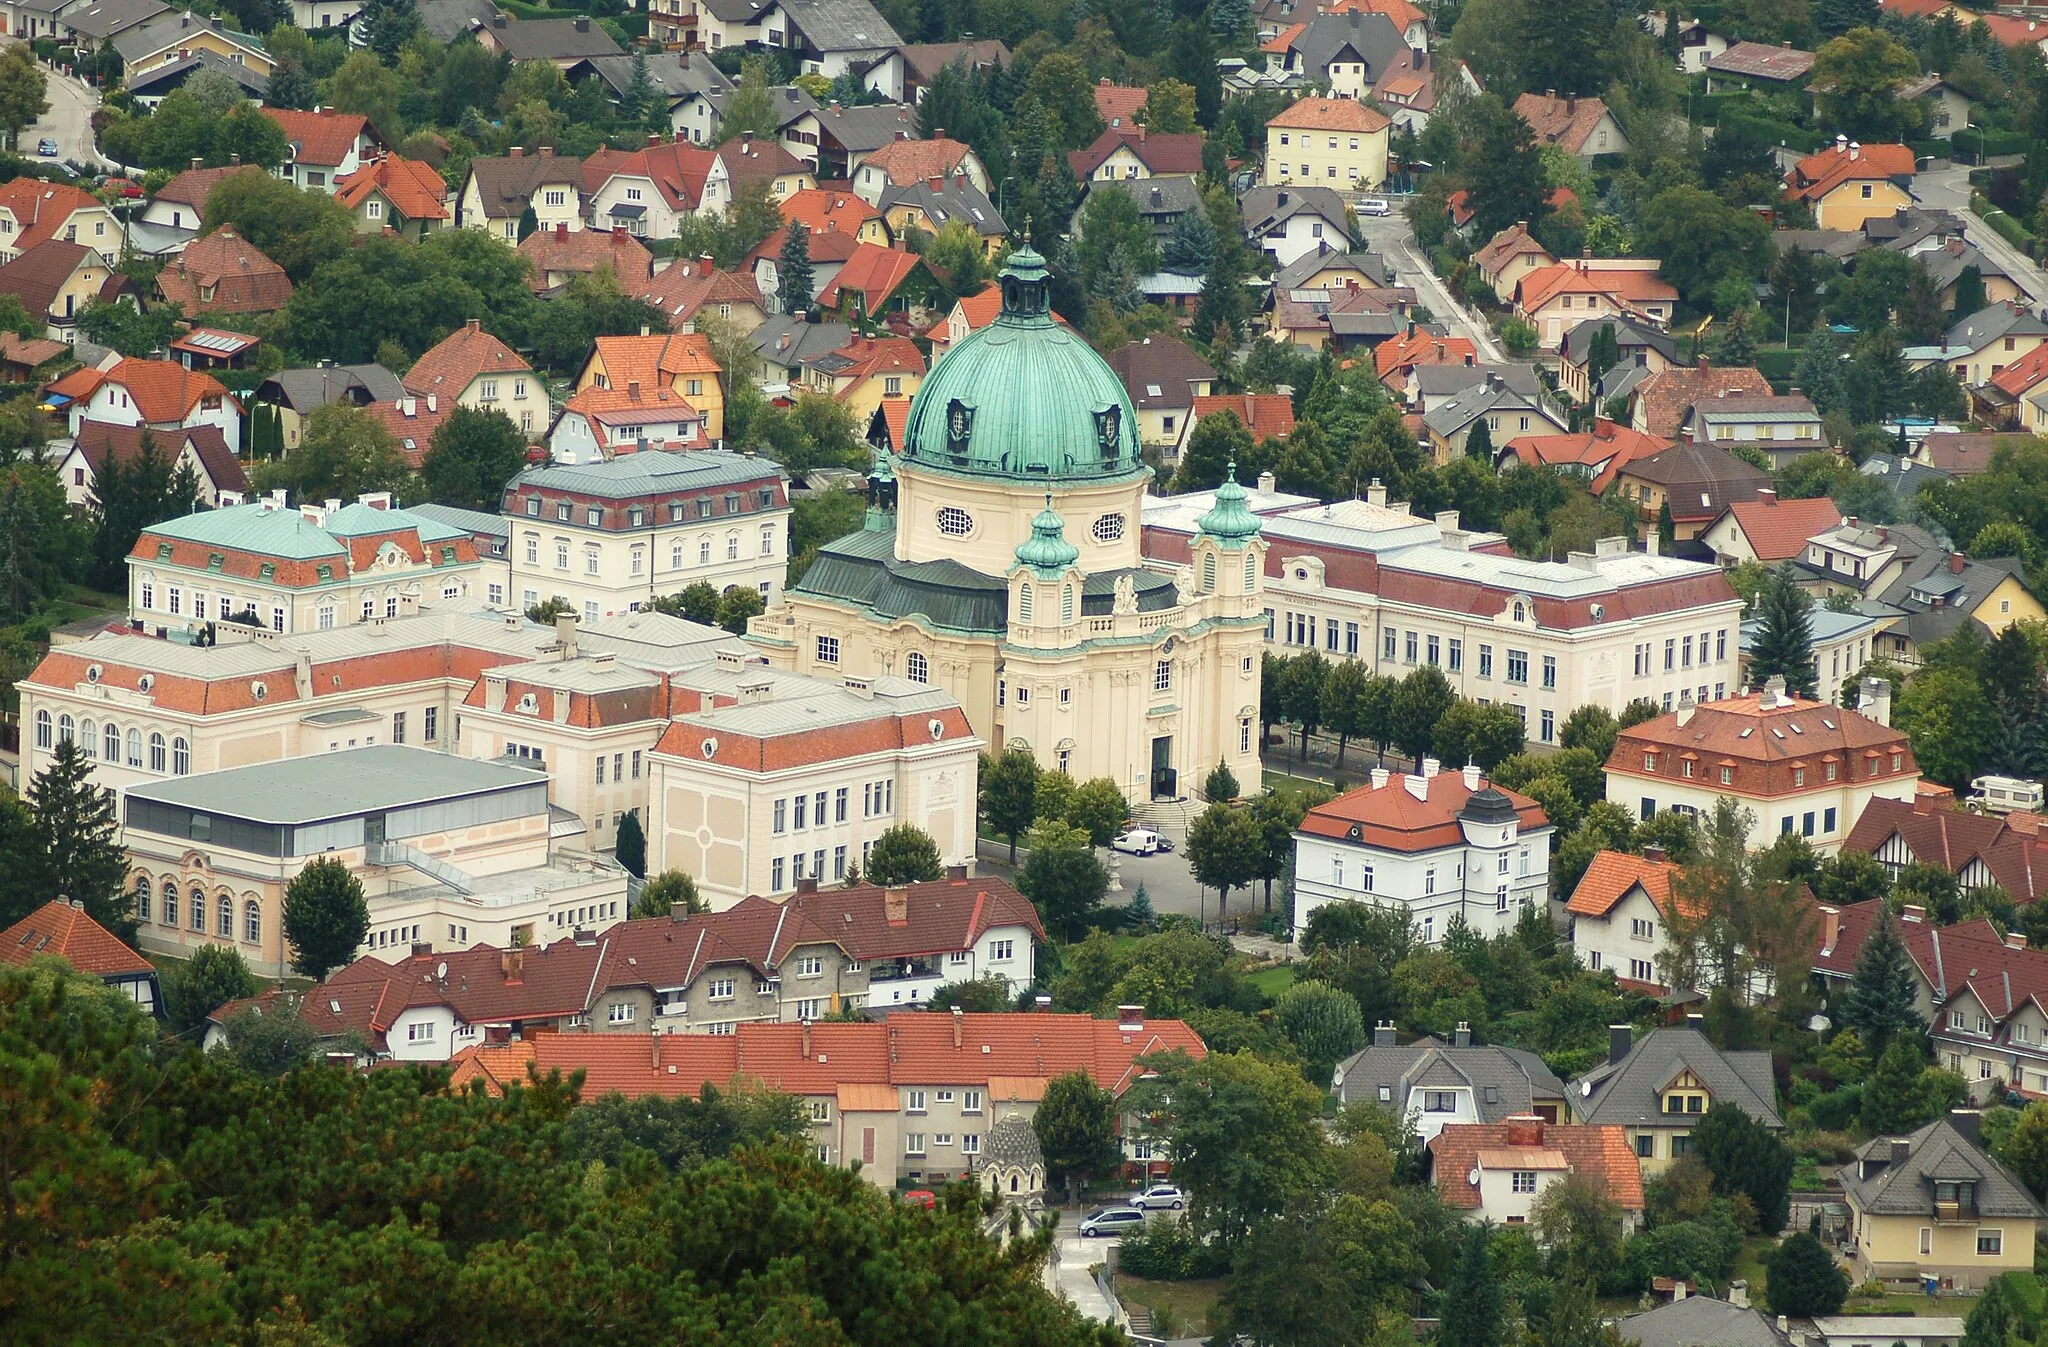 Photo showing: Ensemble Berndorf, Lower Austria, with St. Margarete parish church, famous school buildings with classrooms in different styles (left and right of the church), behind the church the parish priests house (left) and former Konsumanstalt (right side), in front the former Casino of Krupp, today a restaurant, and left the former residential house for the school directors.
Mausoleum of the Krupp family at the bottom border.

(whole scenery seen from Guglzipf, Jubiläumswarte)